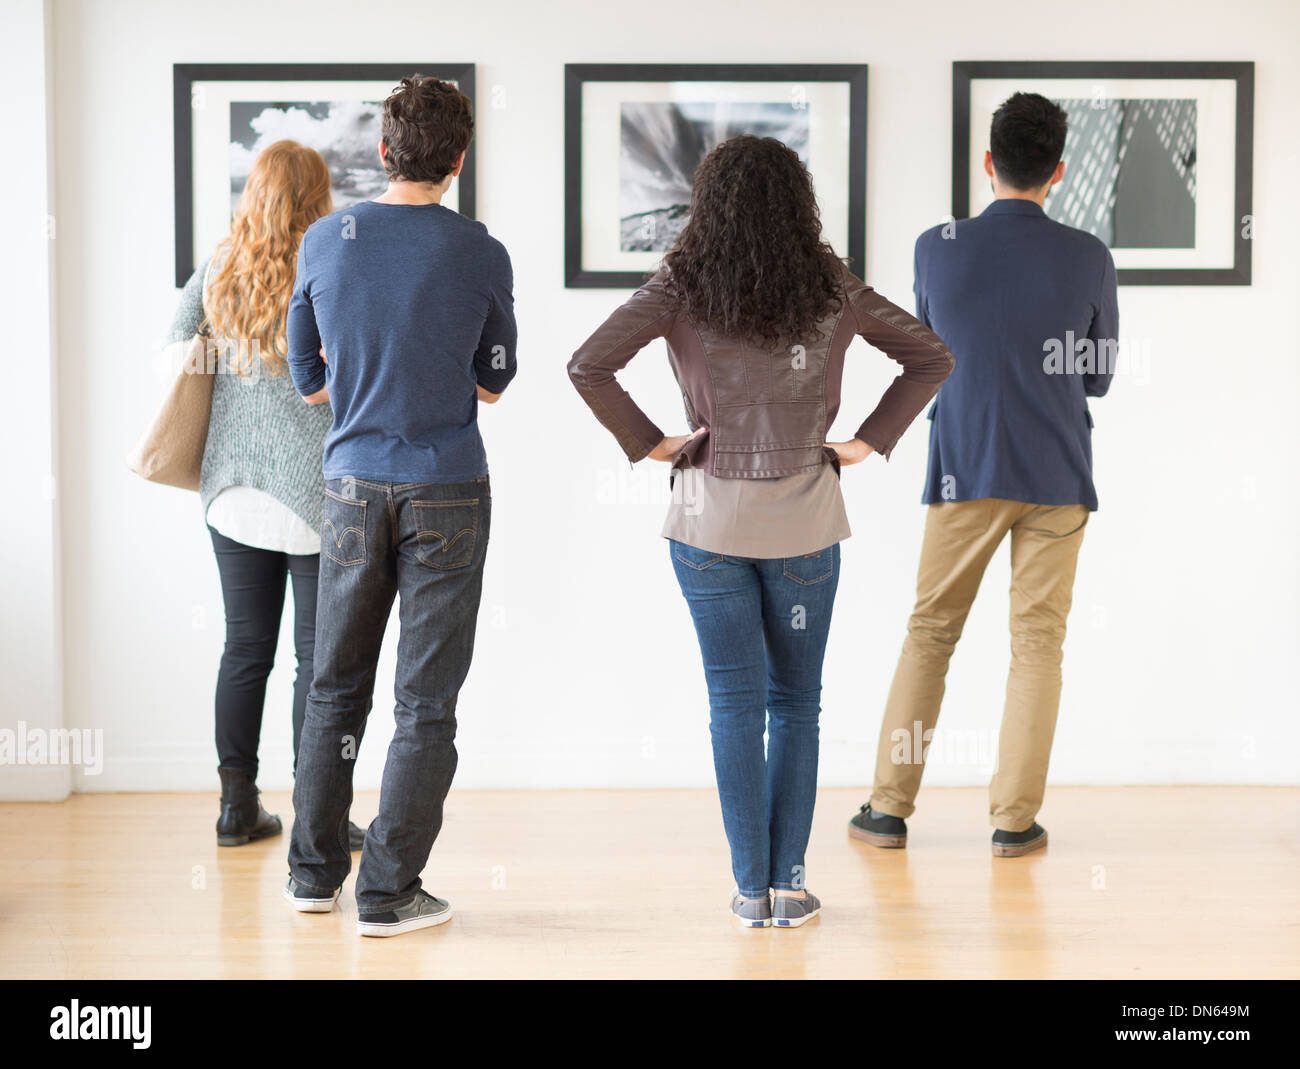 Couples admiring art in gallery Stock Photo